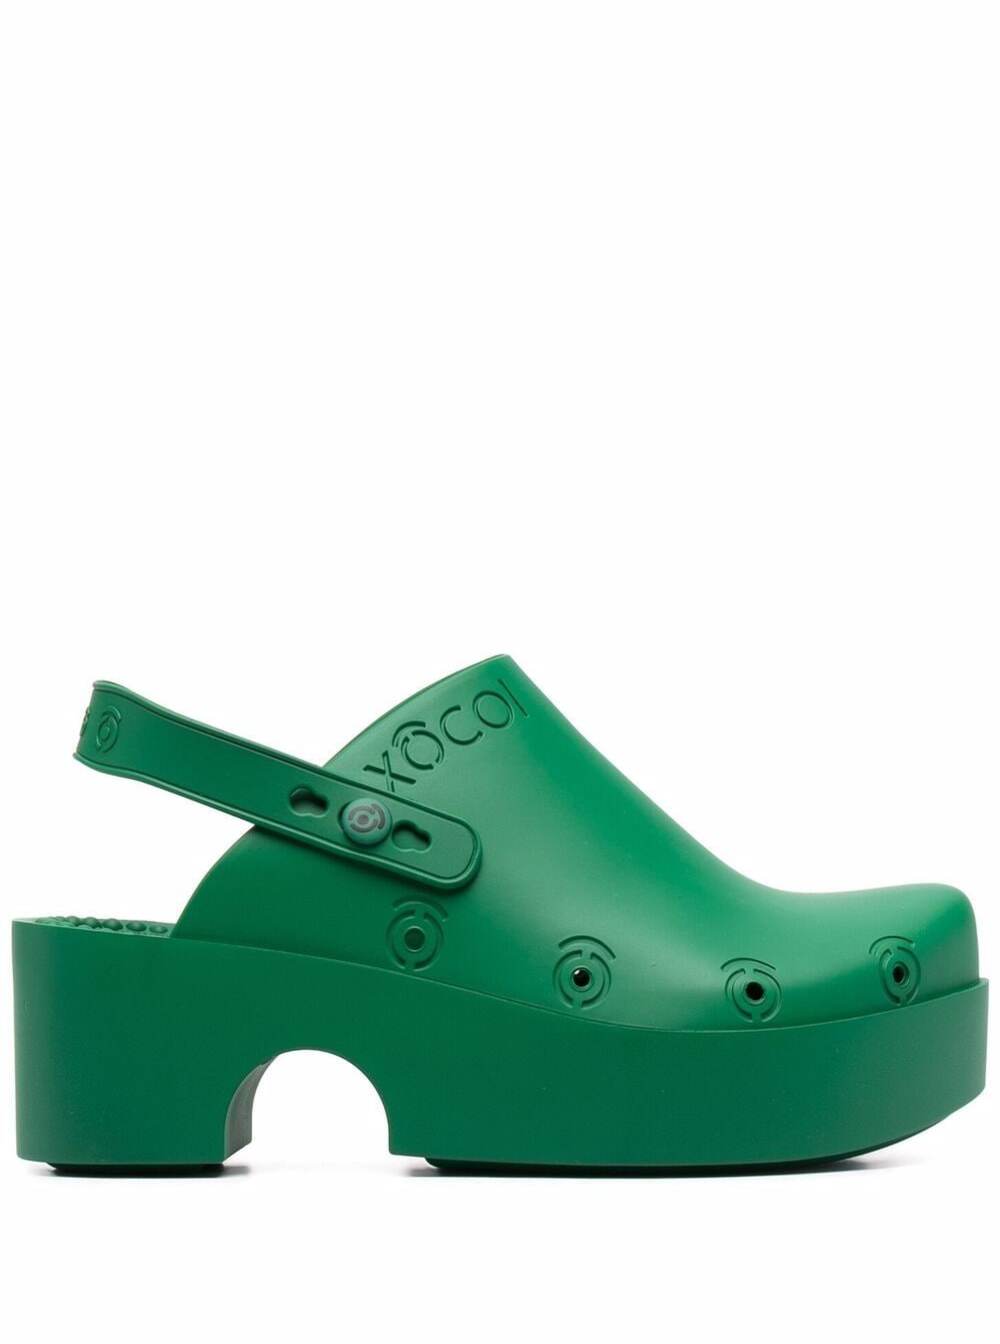 XOCOI LOW WOM GREEN CLOGS IN RUBBER WOMAN